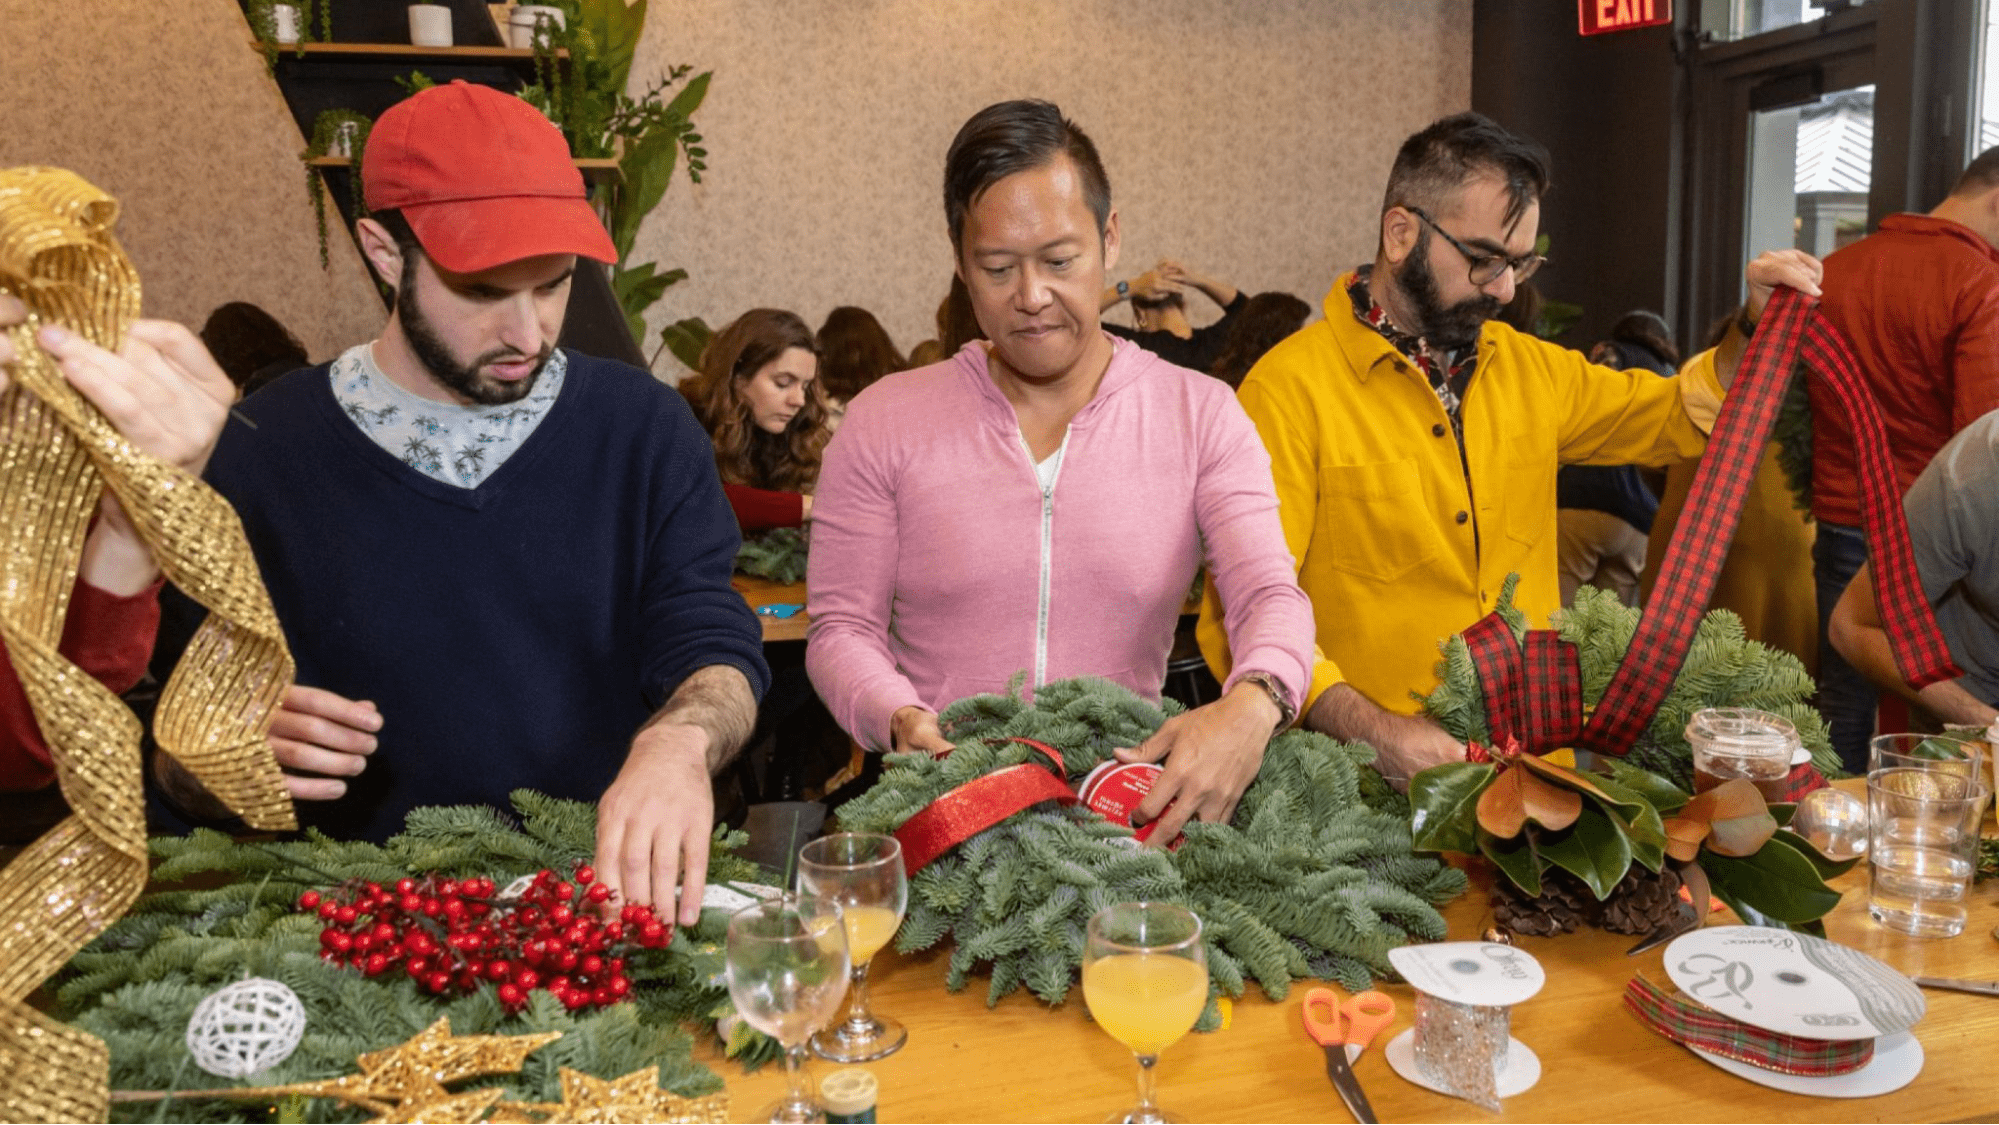 Wreath making event. Three men make wreaths at a table.